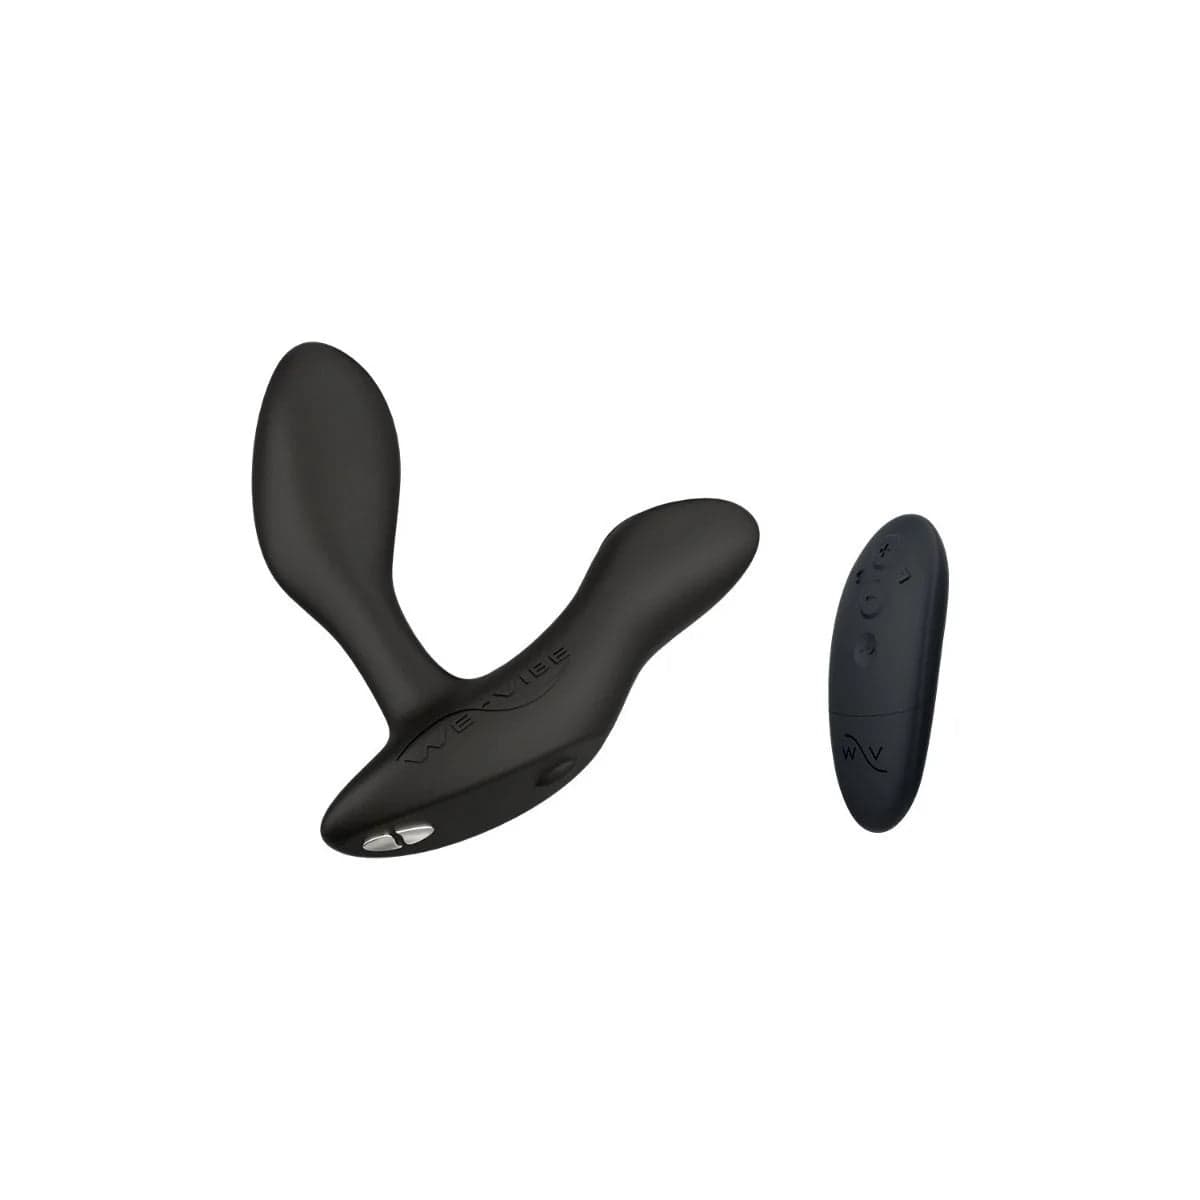 We-Vibe Prostate Plug We-Vibe Vector+ Prostate and Perineum Stimulator at the Haus of Shag